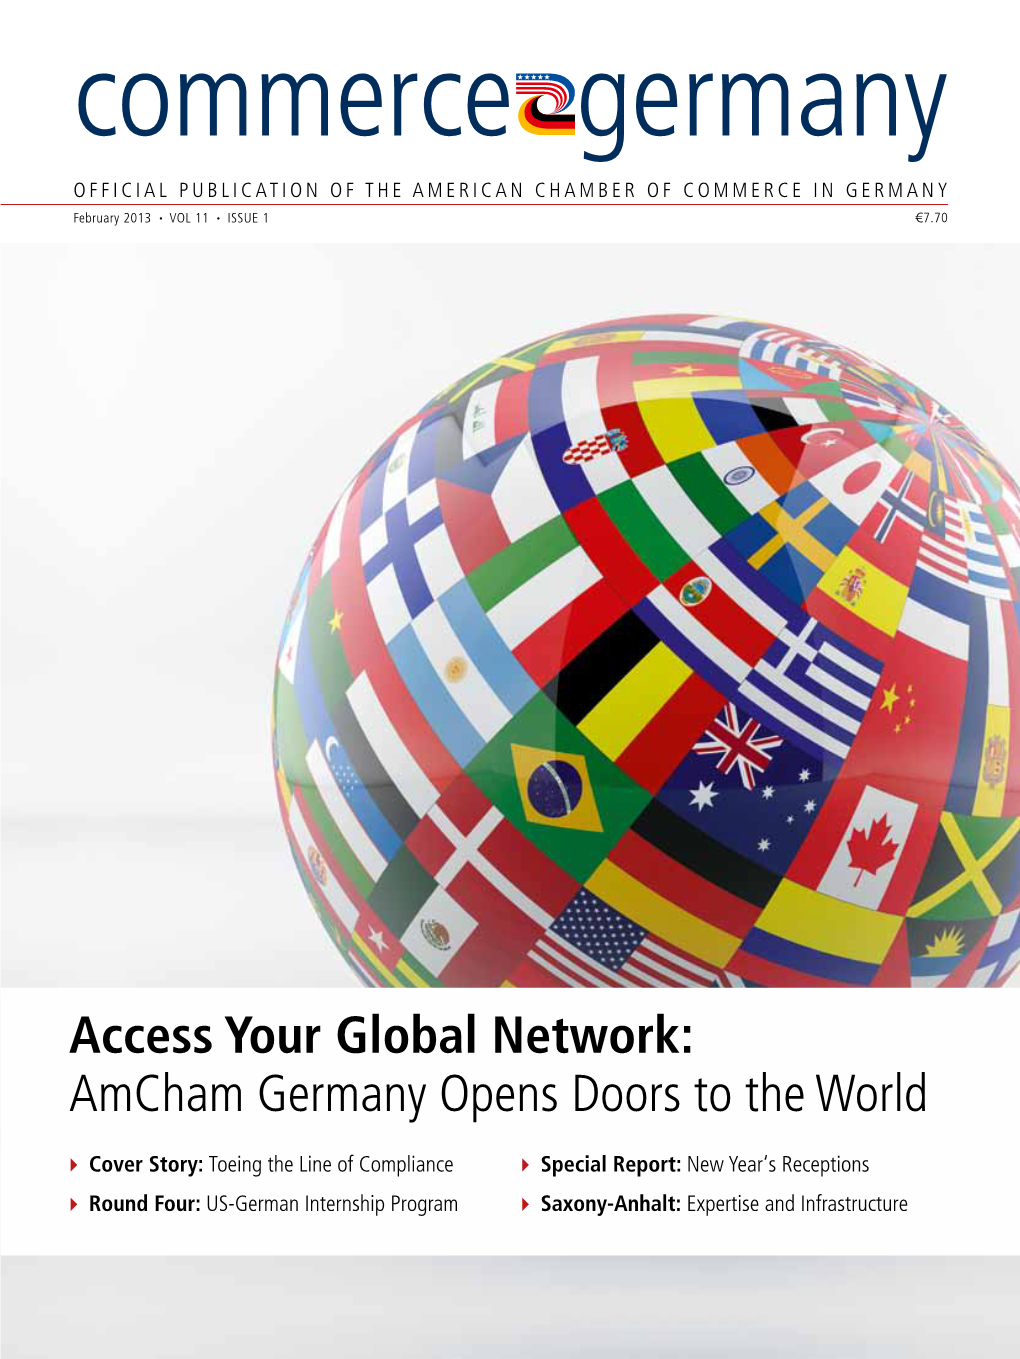 Access Your Global Network: Amcham Germany Opens Doors to the World